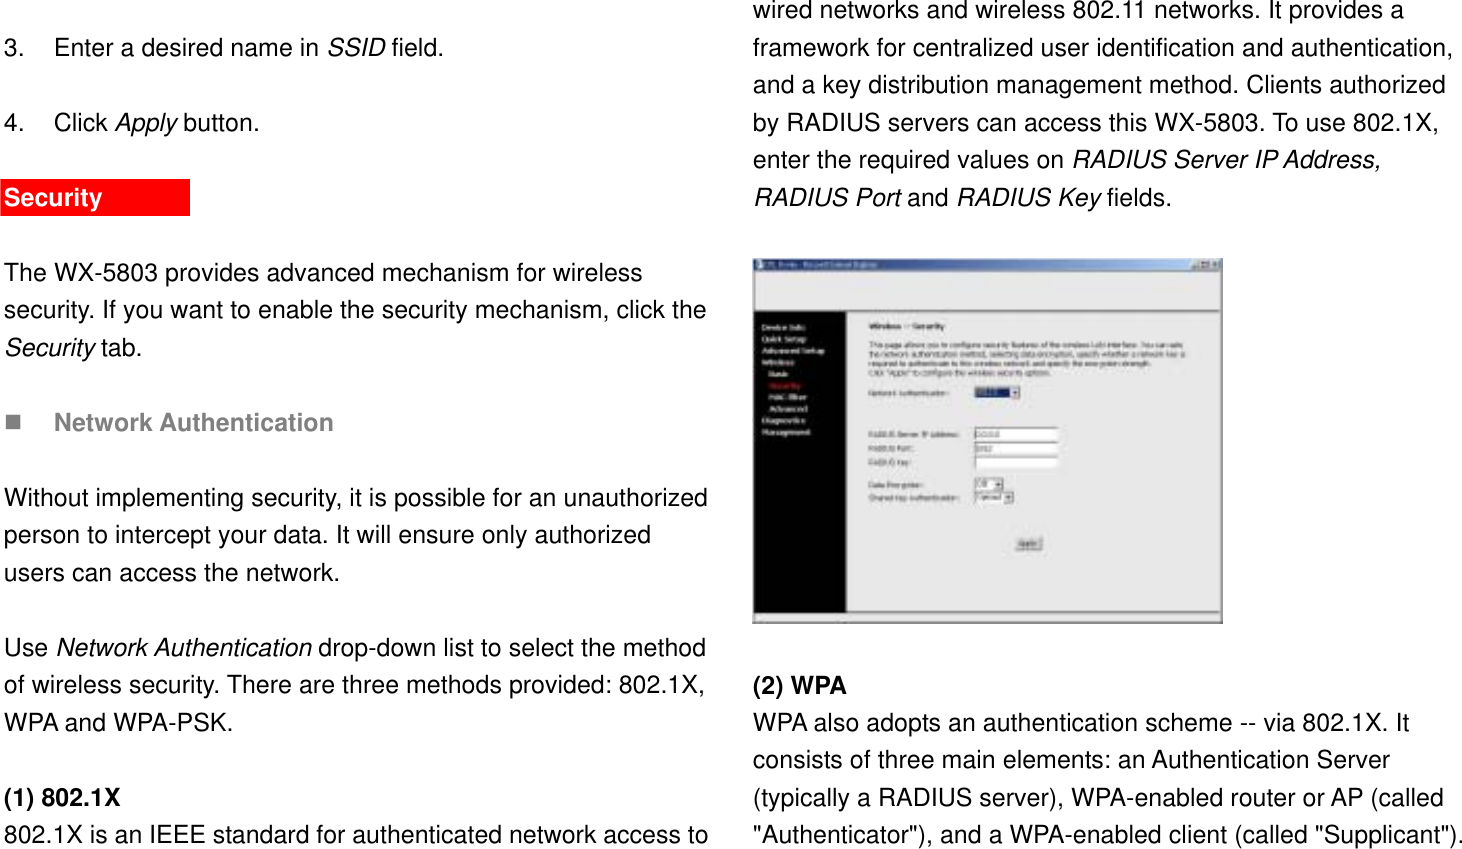  3.  Enter a desired name in SSID field.  4. Click Apply button.  Security  The WX-5803 provides advanced mechanism for wireless security. If you want to enable the security mechanism, click the Security tab.      Network Authentication  Without implementing security, it is possible for an unauthorized person to intercept your data. It will ensure only authorized users can access the network.  Use Network Authentication drop-down list to select the method of wireless security. There are three methods provided: 802.1X, WPA and WPA-PSK.  (1) 802.1X 802.1X is an IEEE standard for authenticated network access to wired networks and wireless 802.11 networks. It provides a framework for centralized user identification and authentication, and a key distribution management method. Clients authorized by RADIUS servers can access this WX-5803. To use 802.1X, enter the required values on RADIUS Server IP Address, RADIUS Port and RADIUS Key fields.      (2) WPA  WPA also adopts an authentication scheme -- via 802.1X. It consists of three main elements: an Authentication Server (typically a RADIUS server), WPA-enabled router or AP (called &quot;Authenticator&quot;), and a WPA-enabled client (called &quot;Supplicant&quot;). 